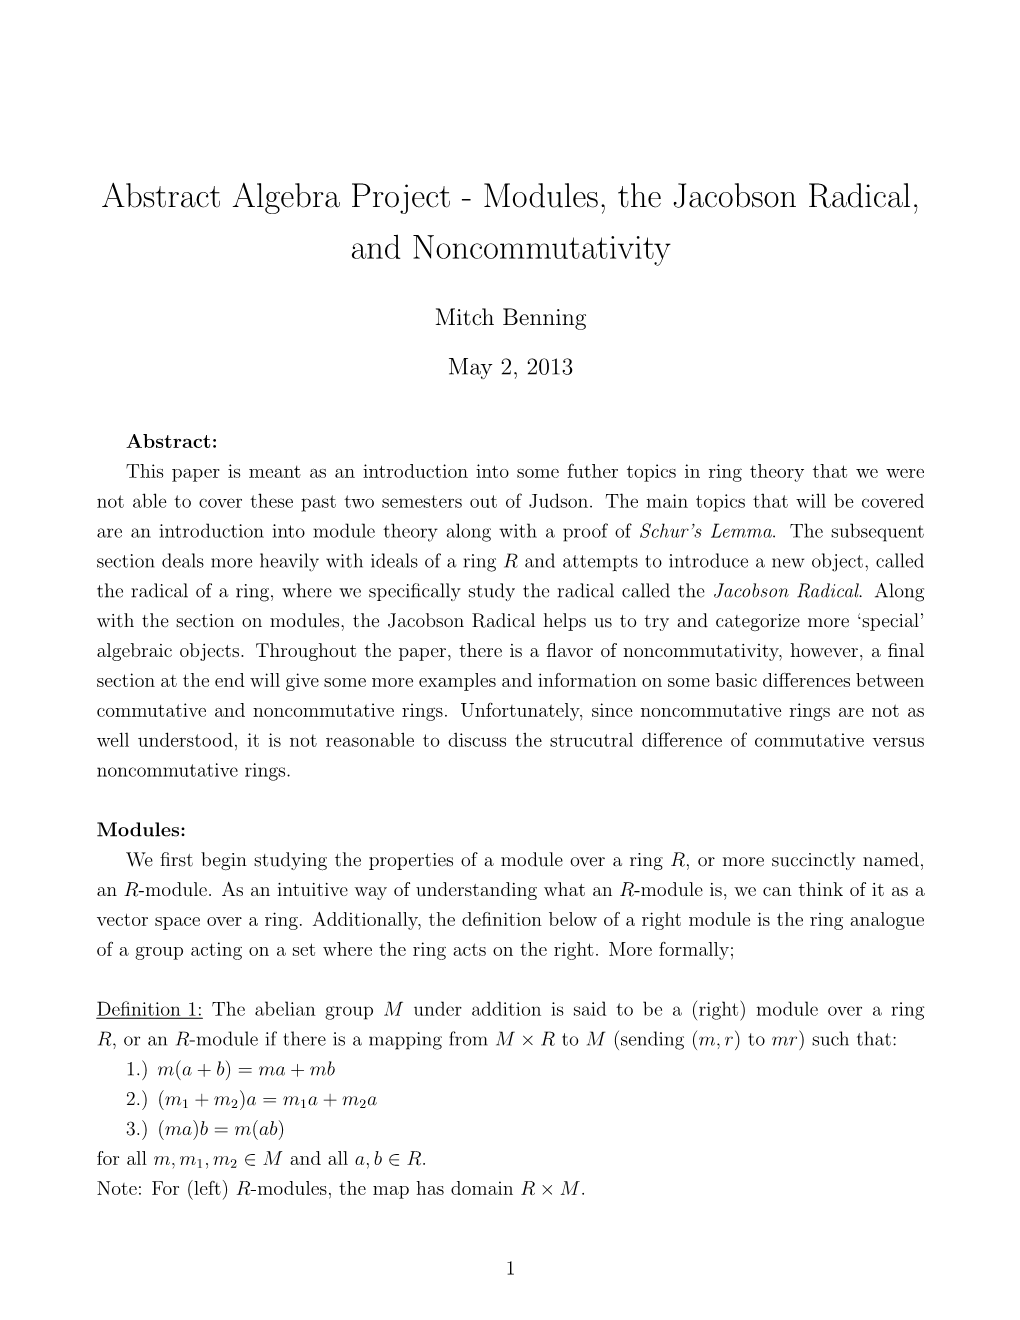 Modules, the Jacobson Radical, and Noncommutativity